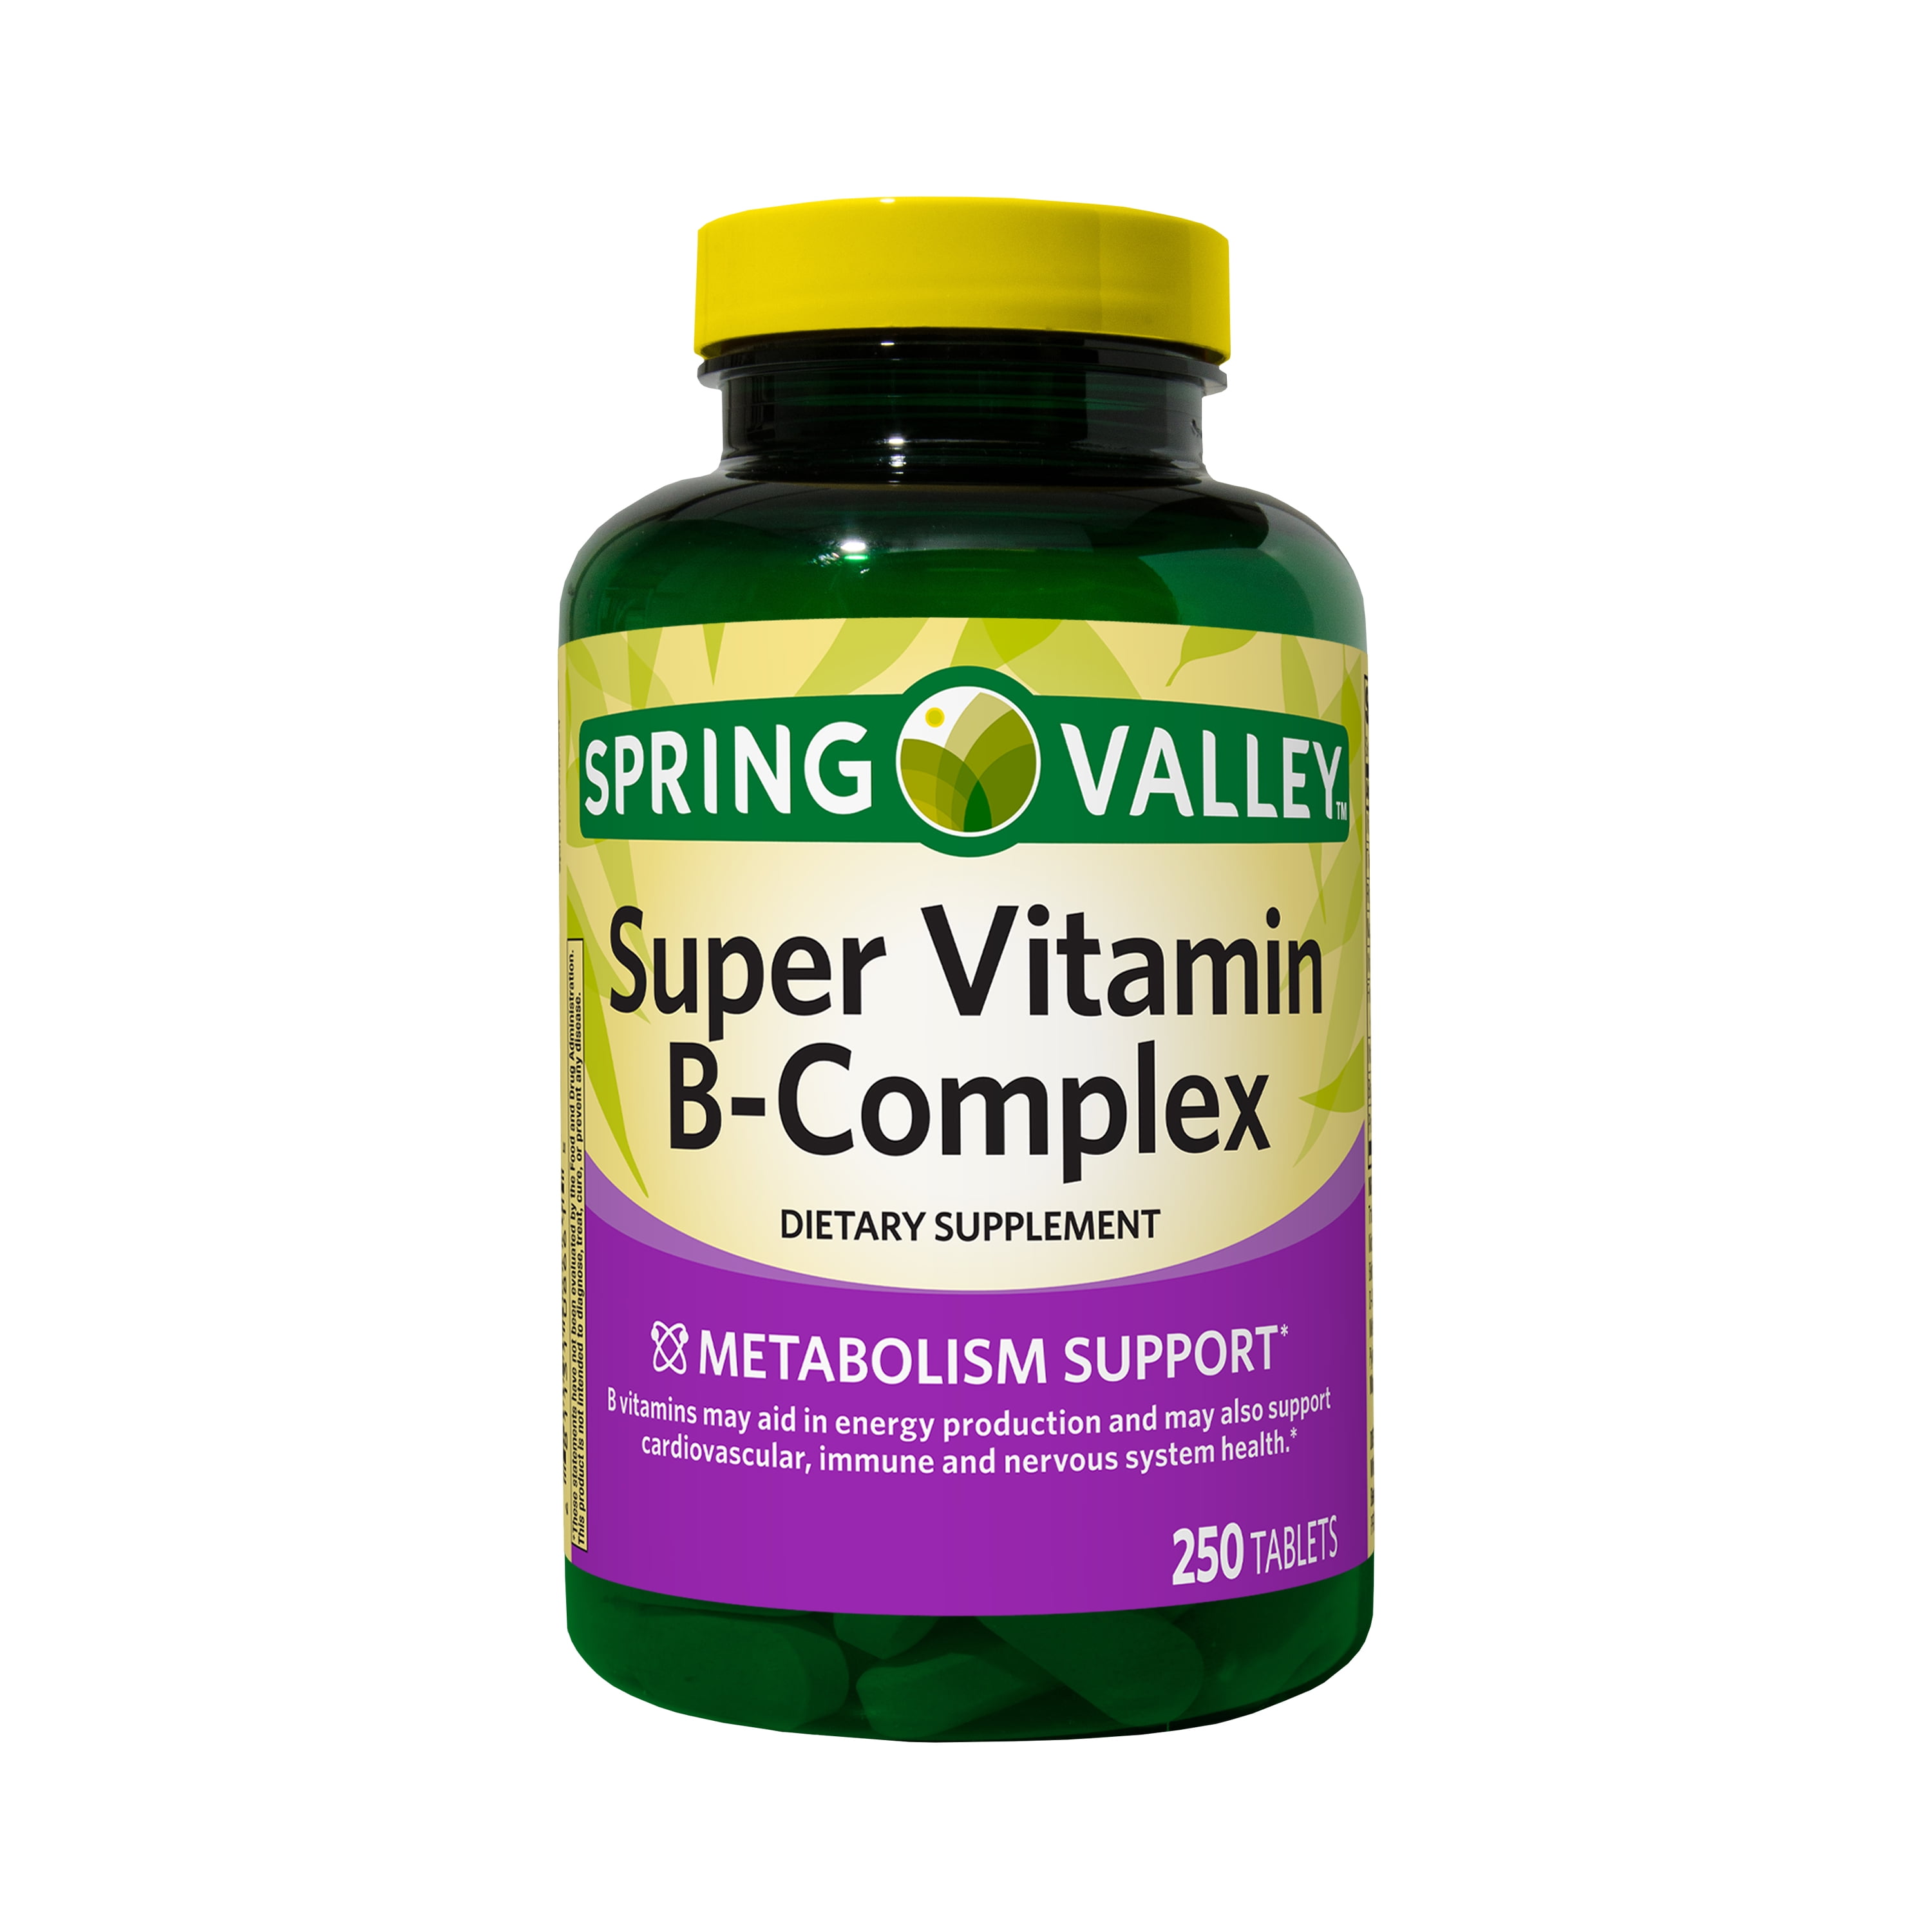 Spring Valley Super Vitamin B-Complex Tablets Dietary Supplement, 250 Count